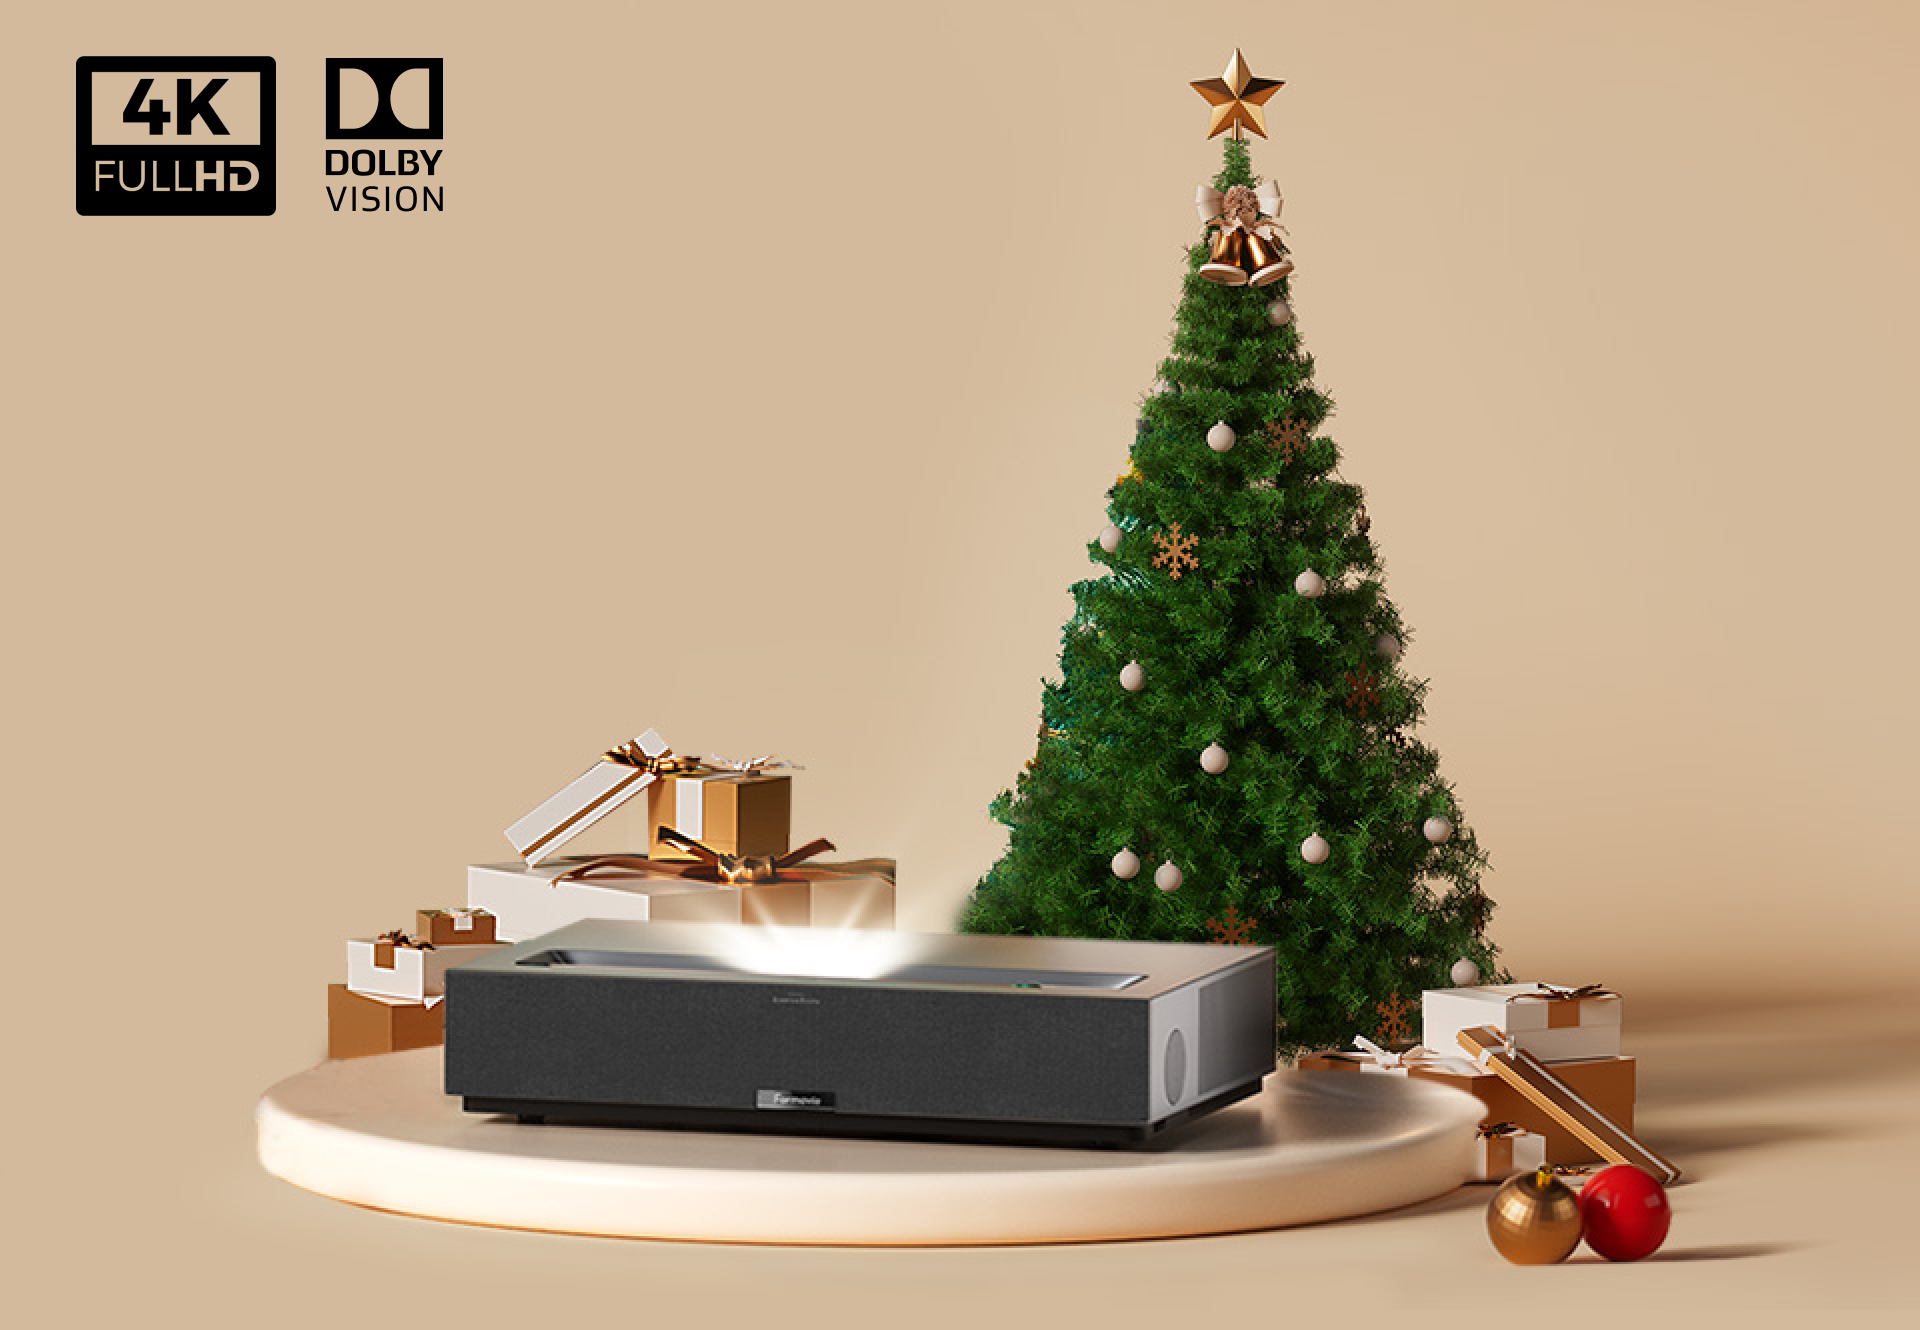 All You Need for Christmas Is a 4K Projector with Dolby Vision